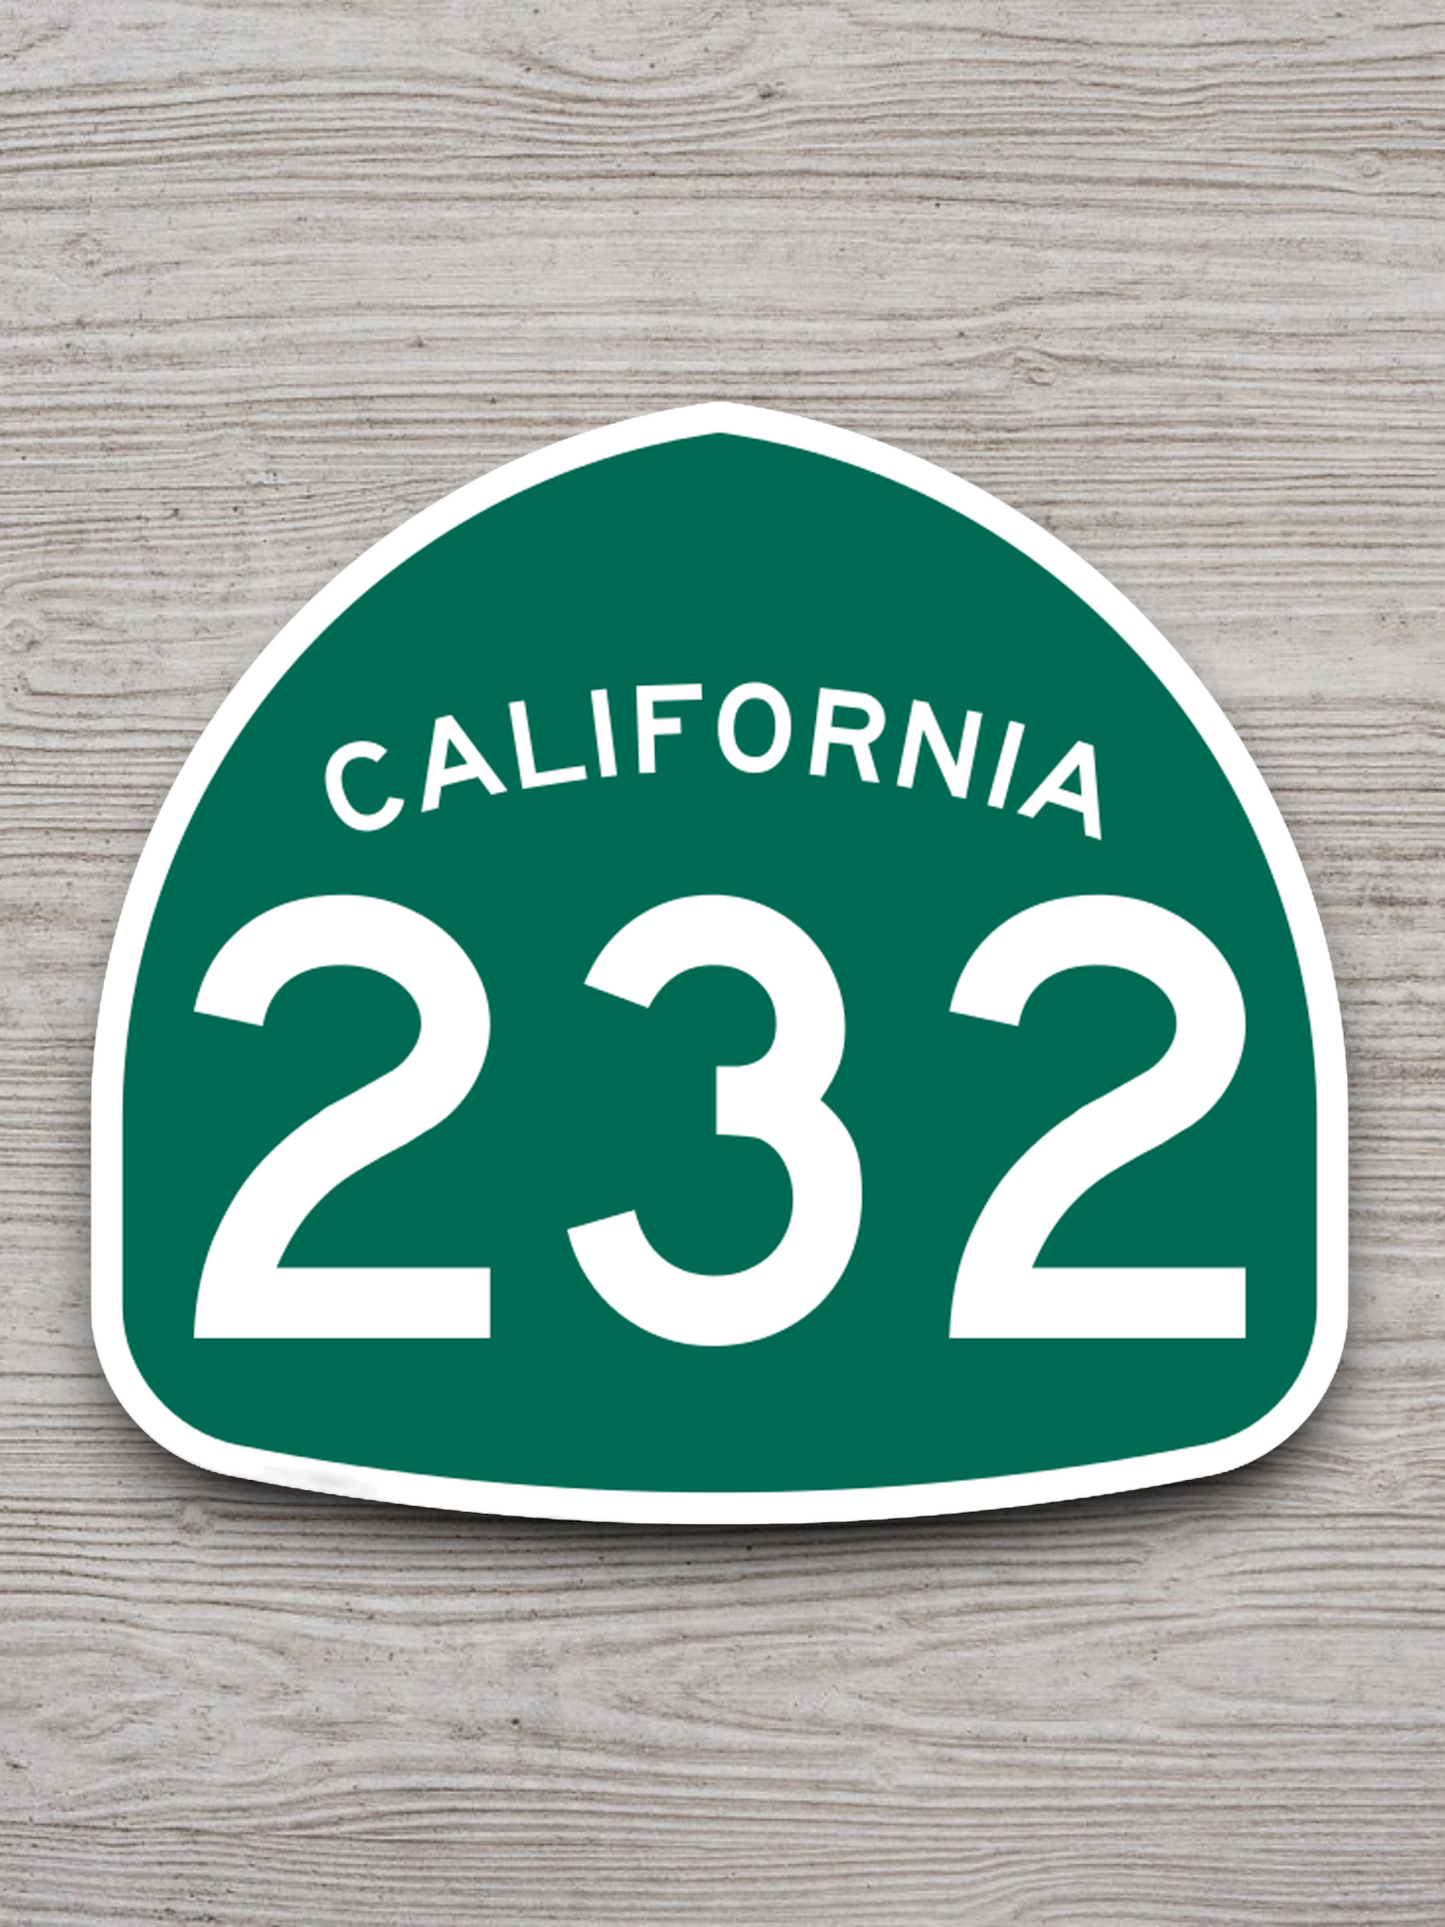 California State Route 232 Road Sign Sticker